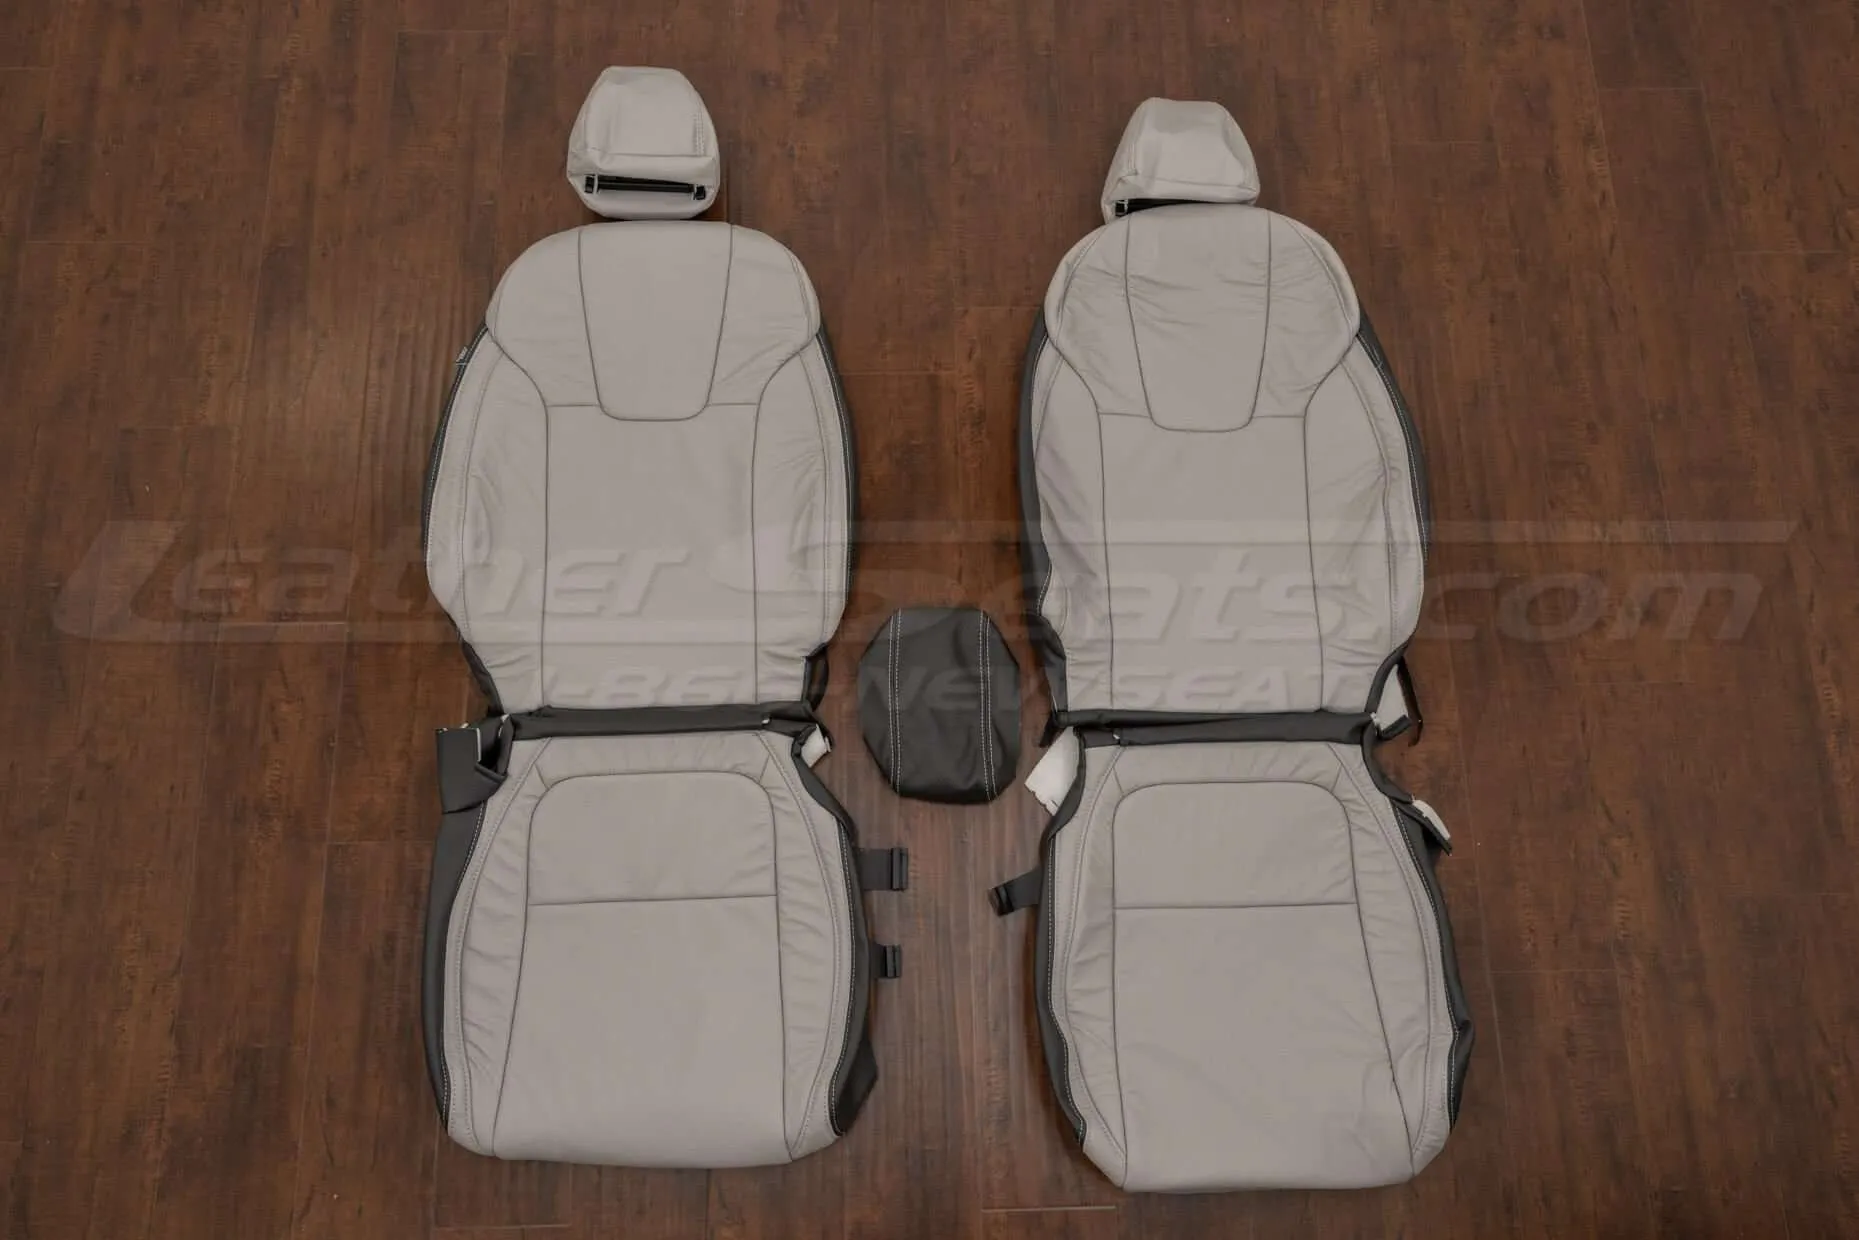 Honda Insight Leather Seat Kit - Dark Graphite & Dove Grey - Front seat upholstery with console lid cover